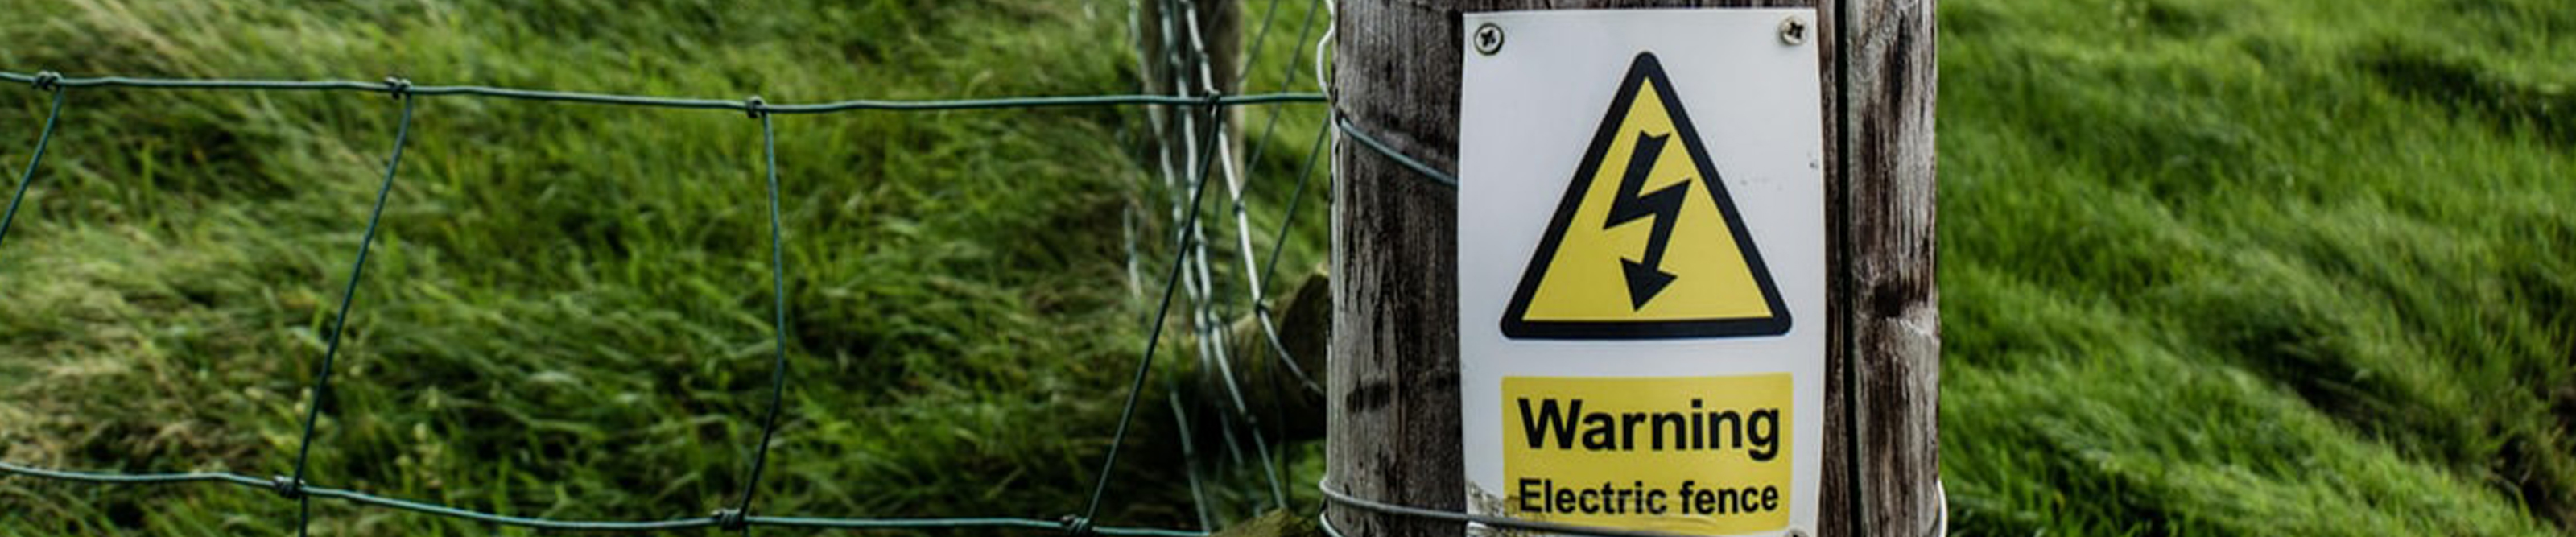 THE BASICS OF ELECTRIC FENCING - FENCING SUPPLIES, WALLINGTON